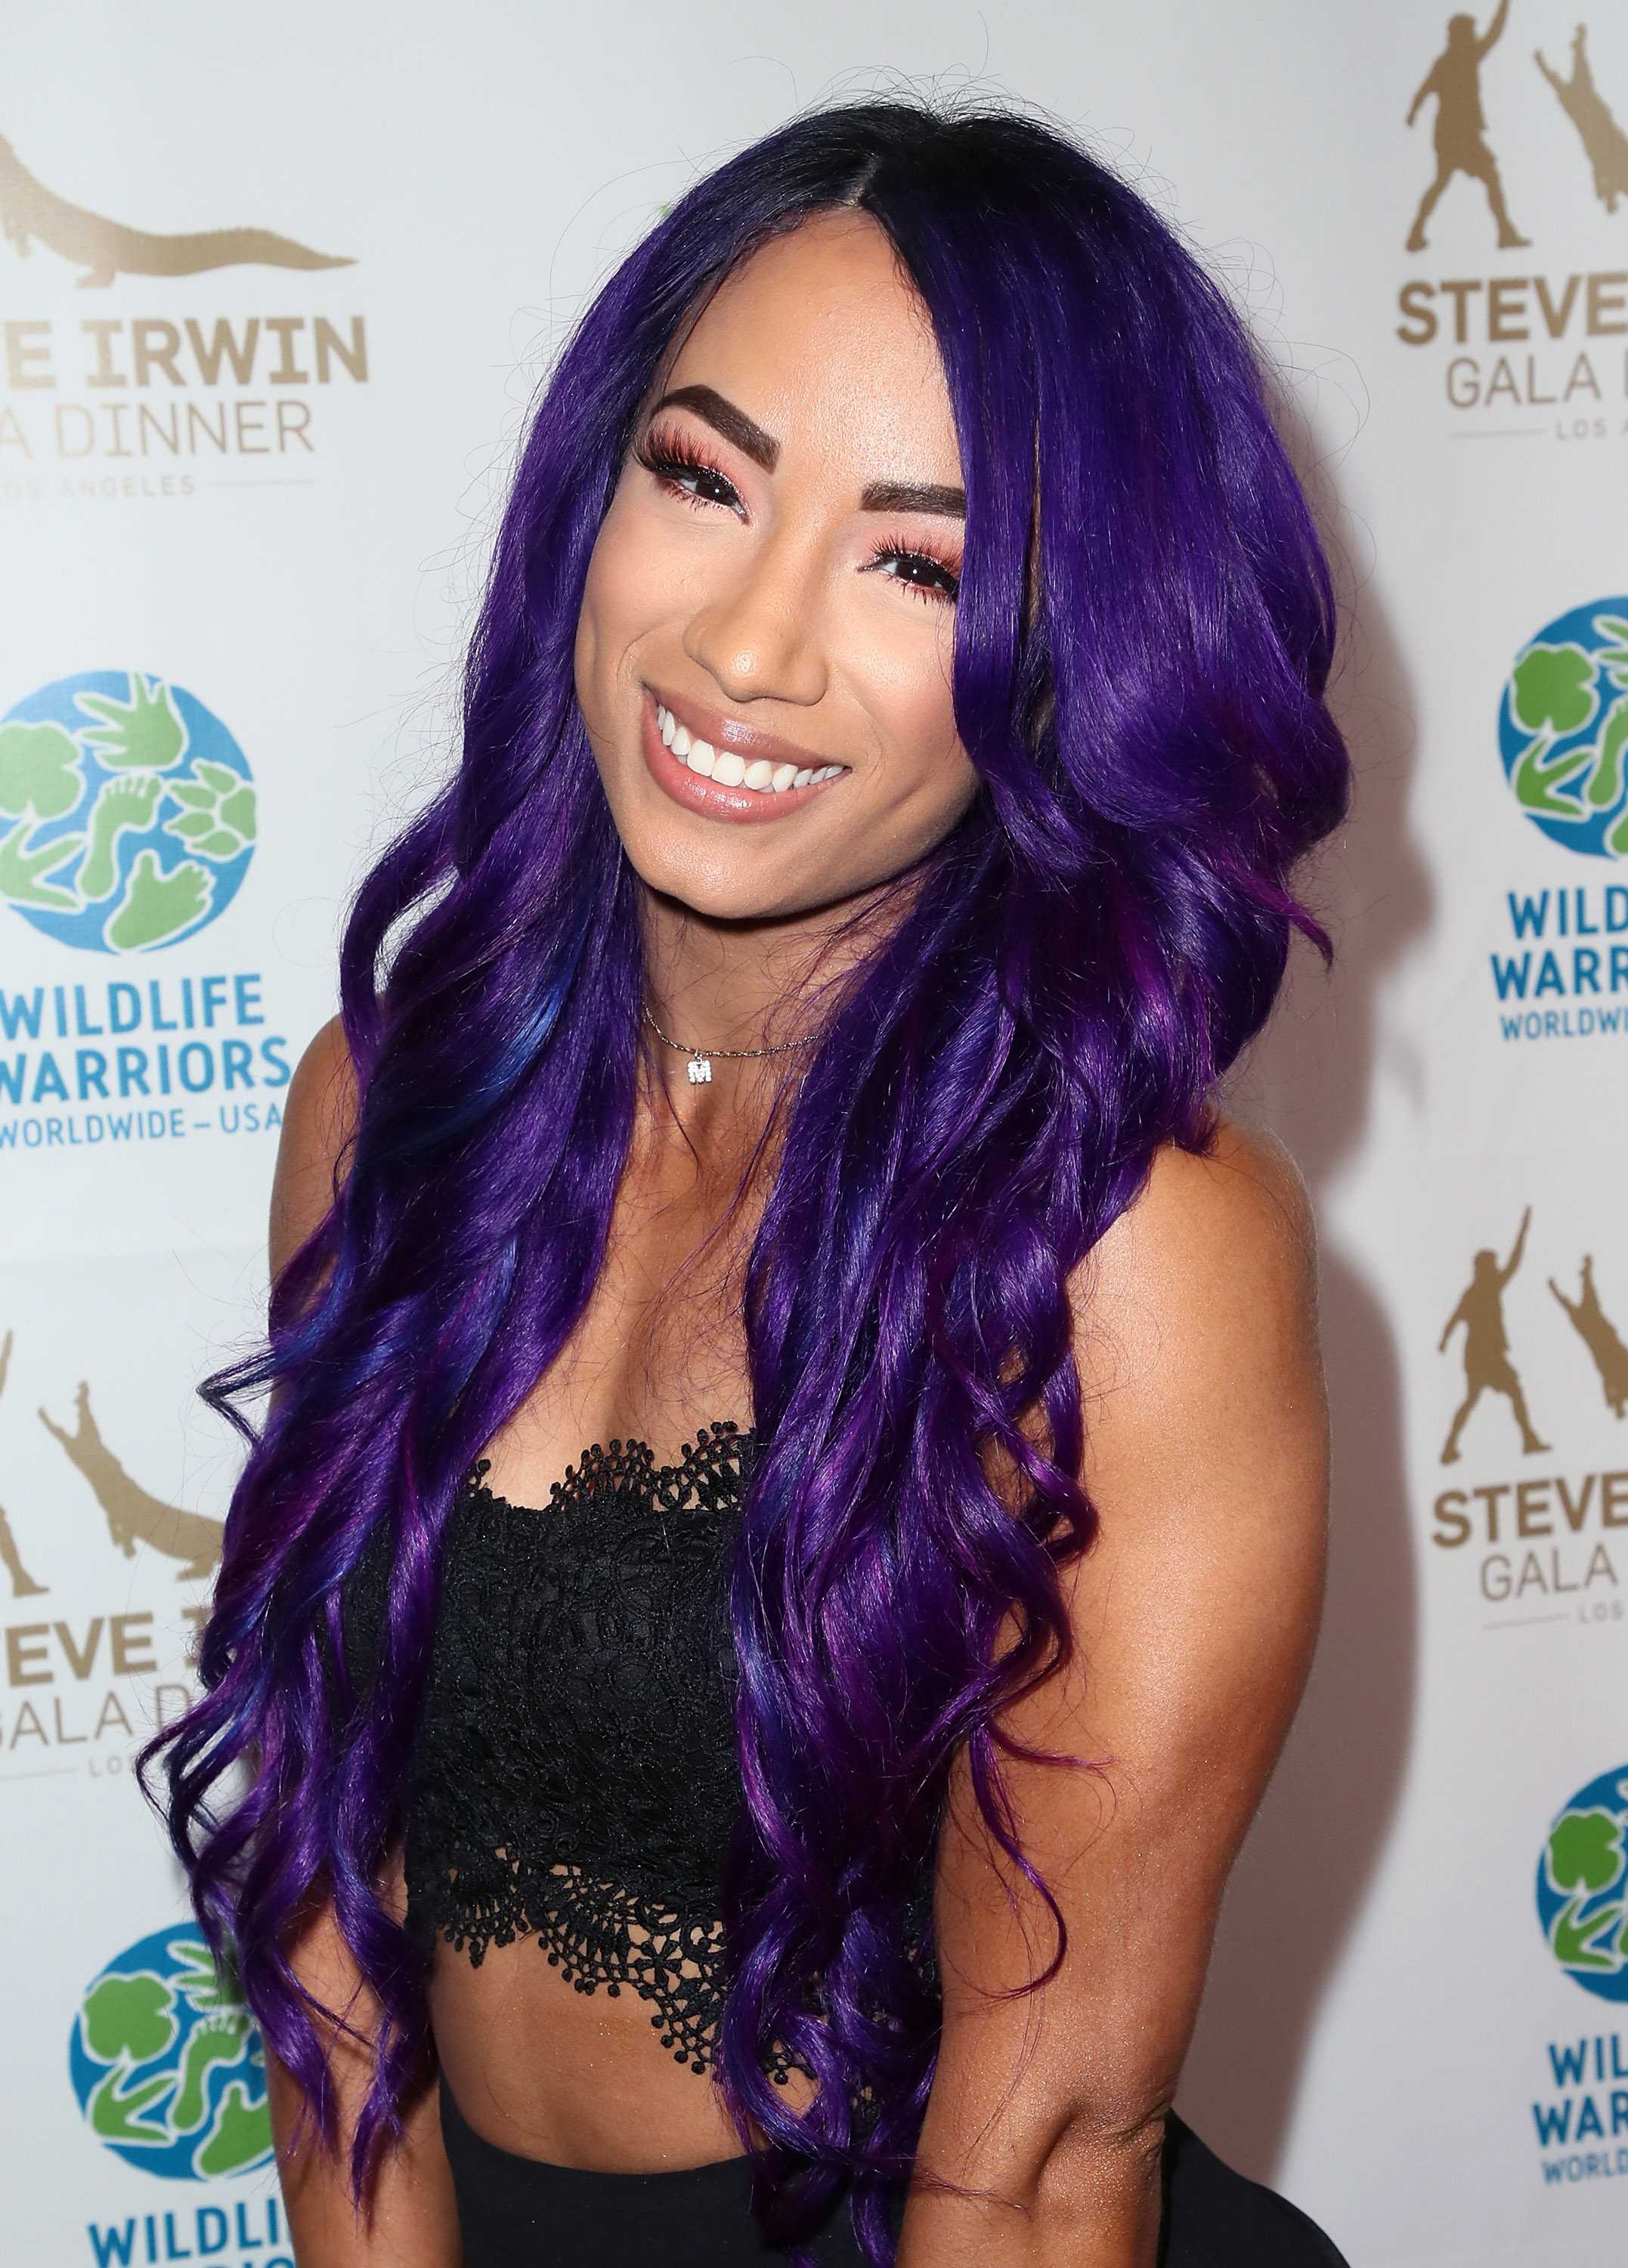 75+ Hot Pictures Of Sasha Banks WWE Diva Are Just Too Damn Sexy | Best Of Comic Books